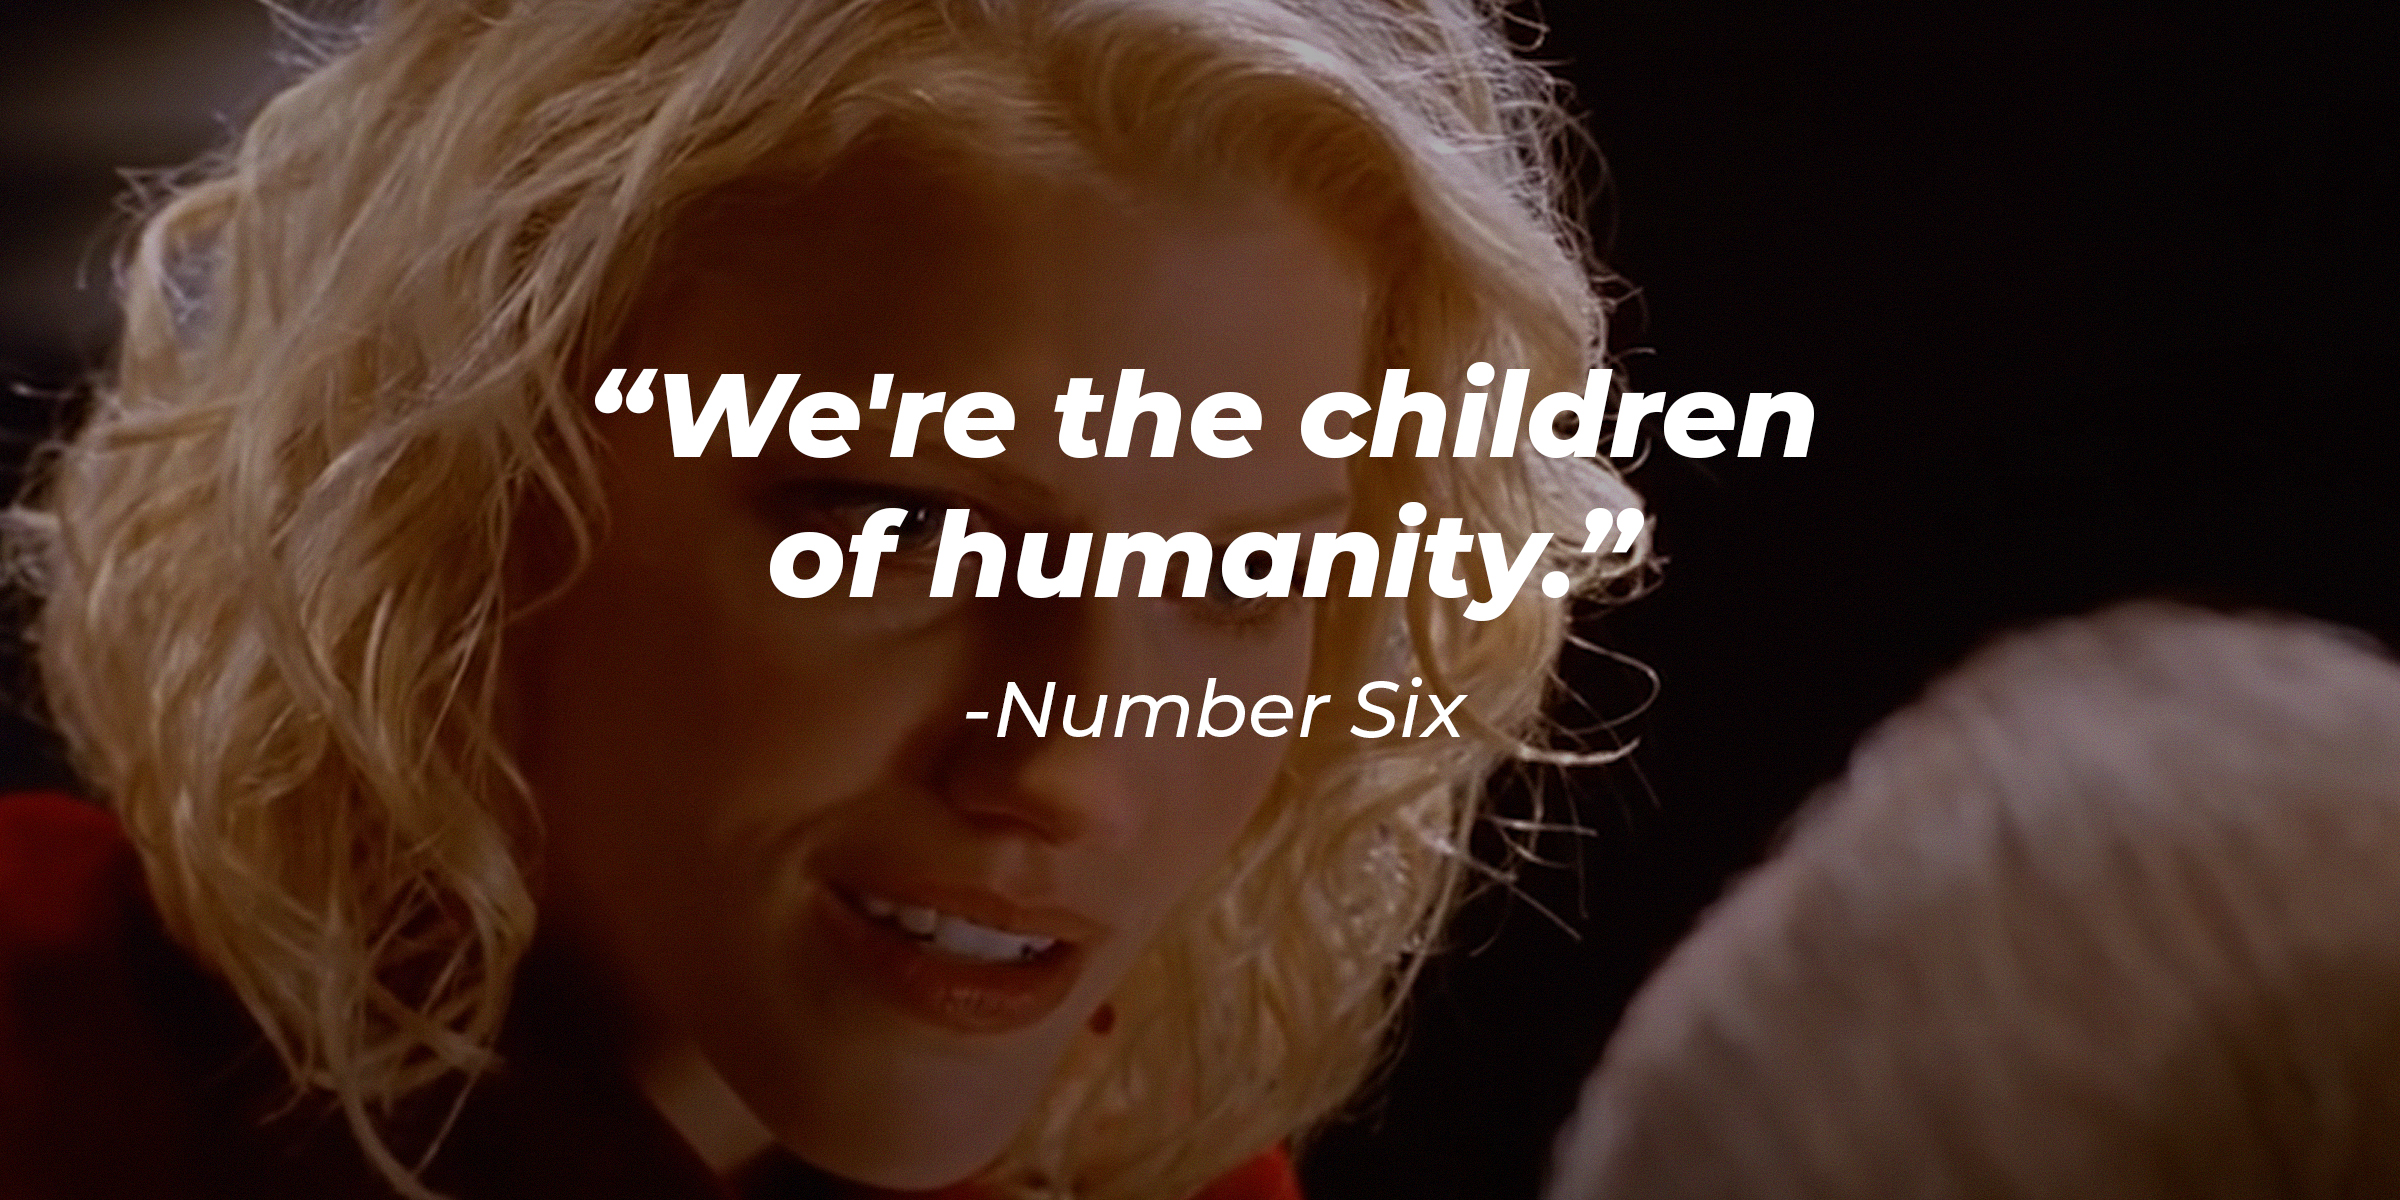 An image of Number Six with her quote: “We're the children of humanity.” | Source: youtube.com/BattlestarGalactica